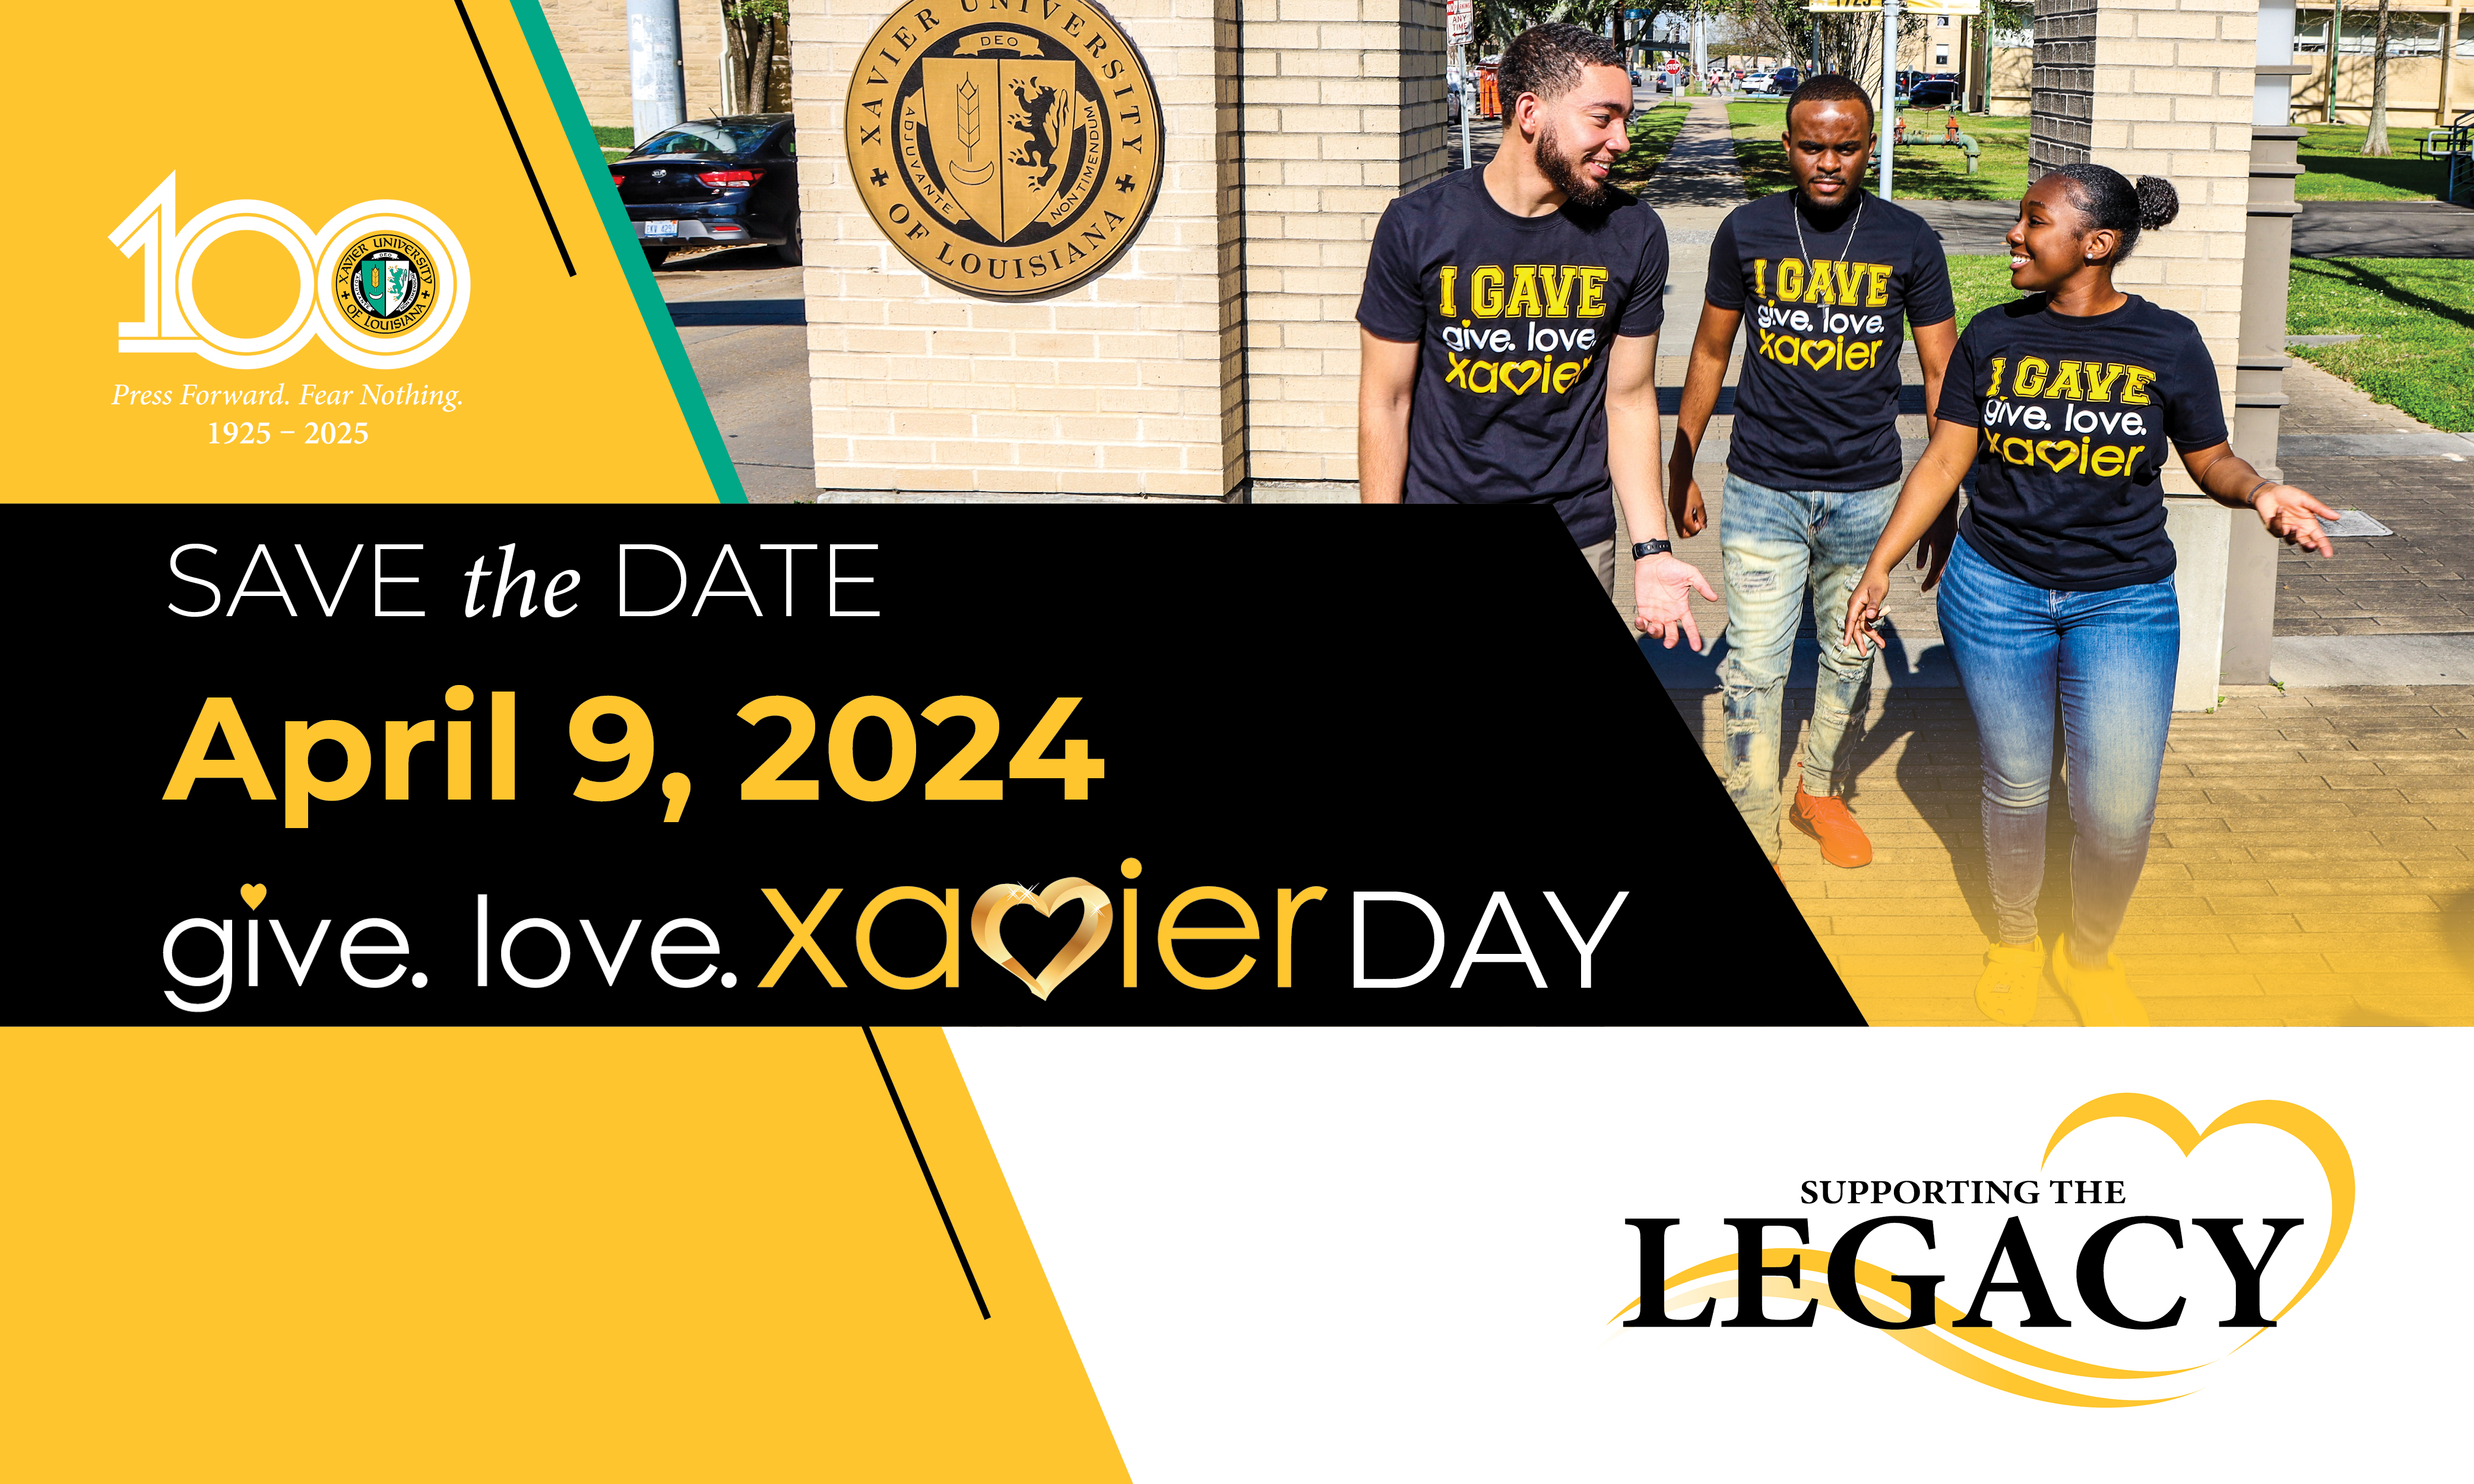 Support Xavier University of Louisiana’s Century-Long Legacy of Excellence on Give.Love.Xavier Day